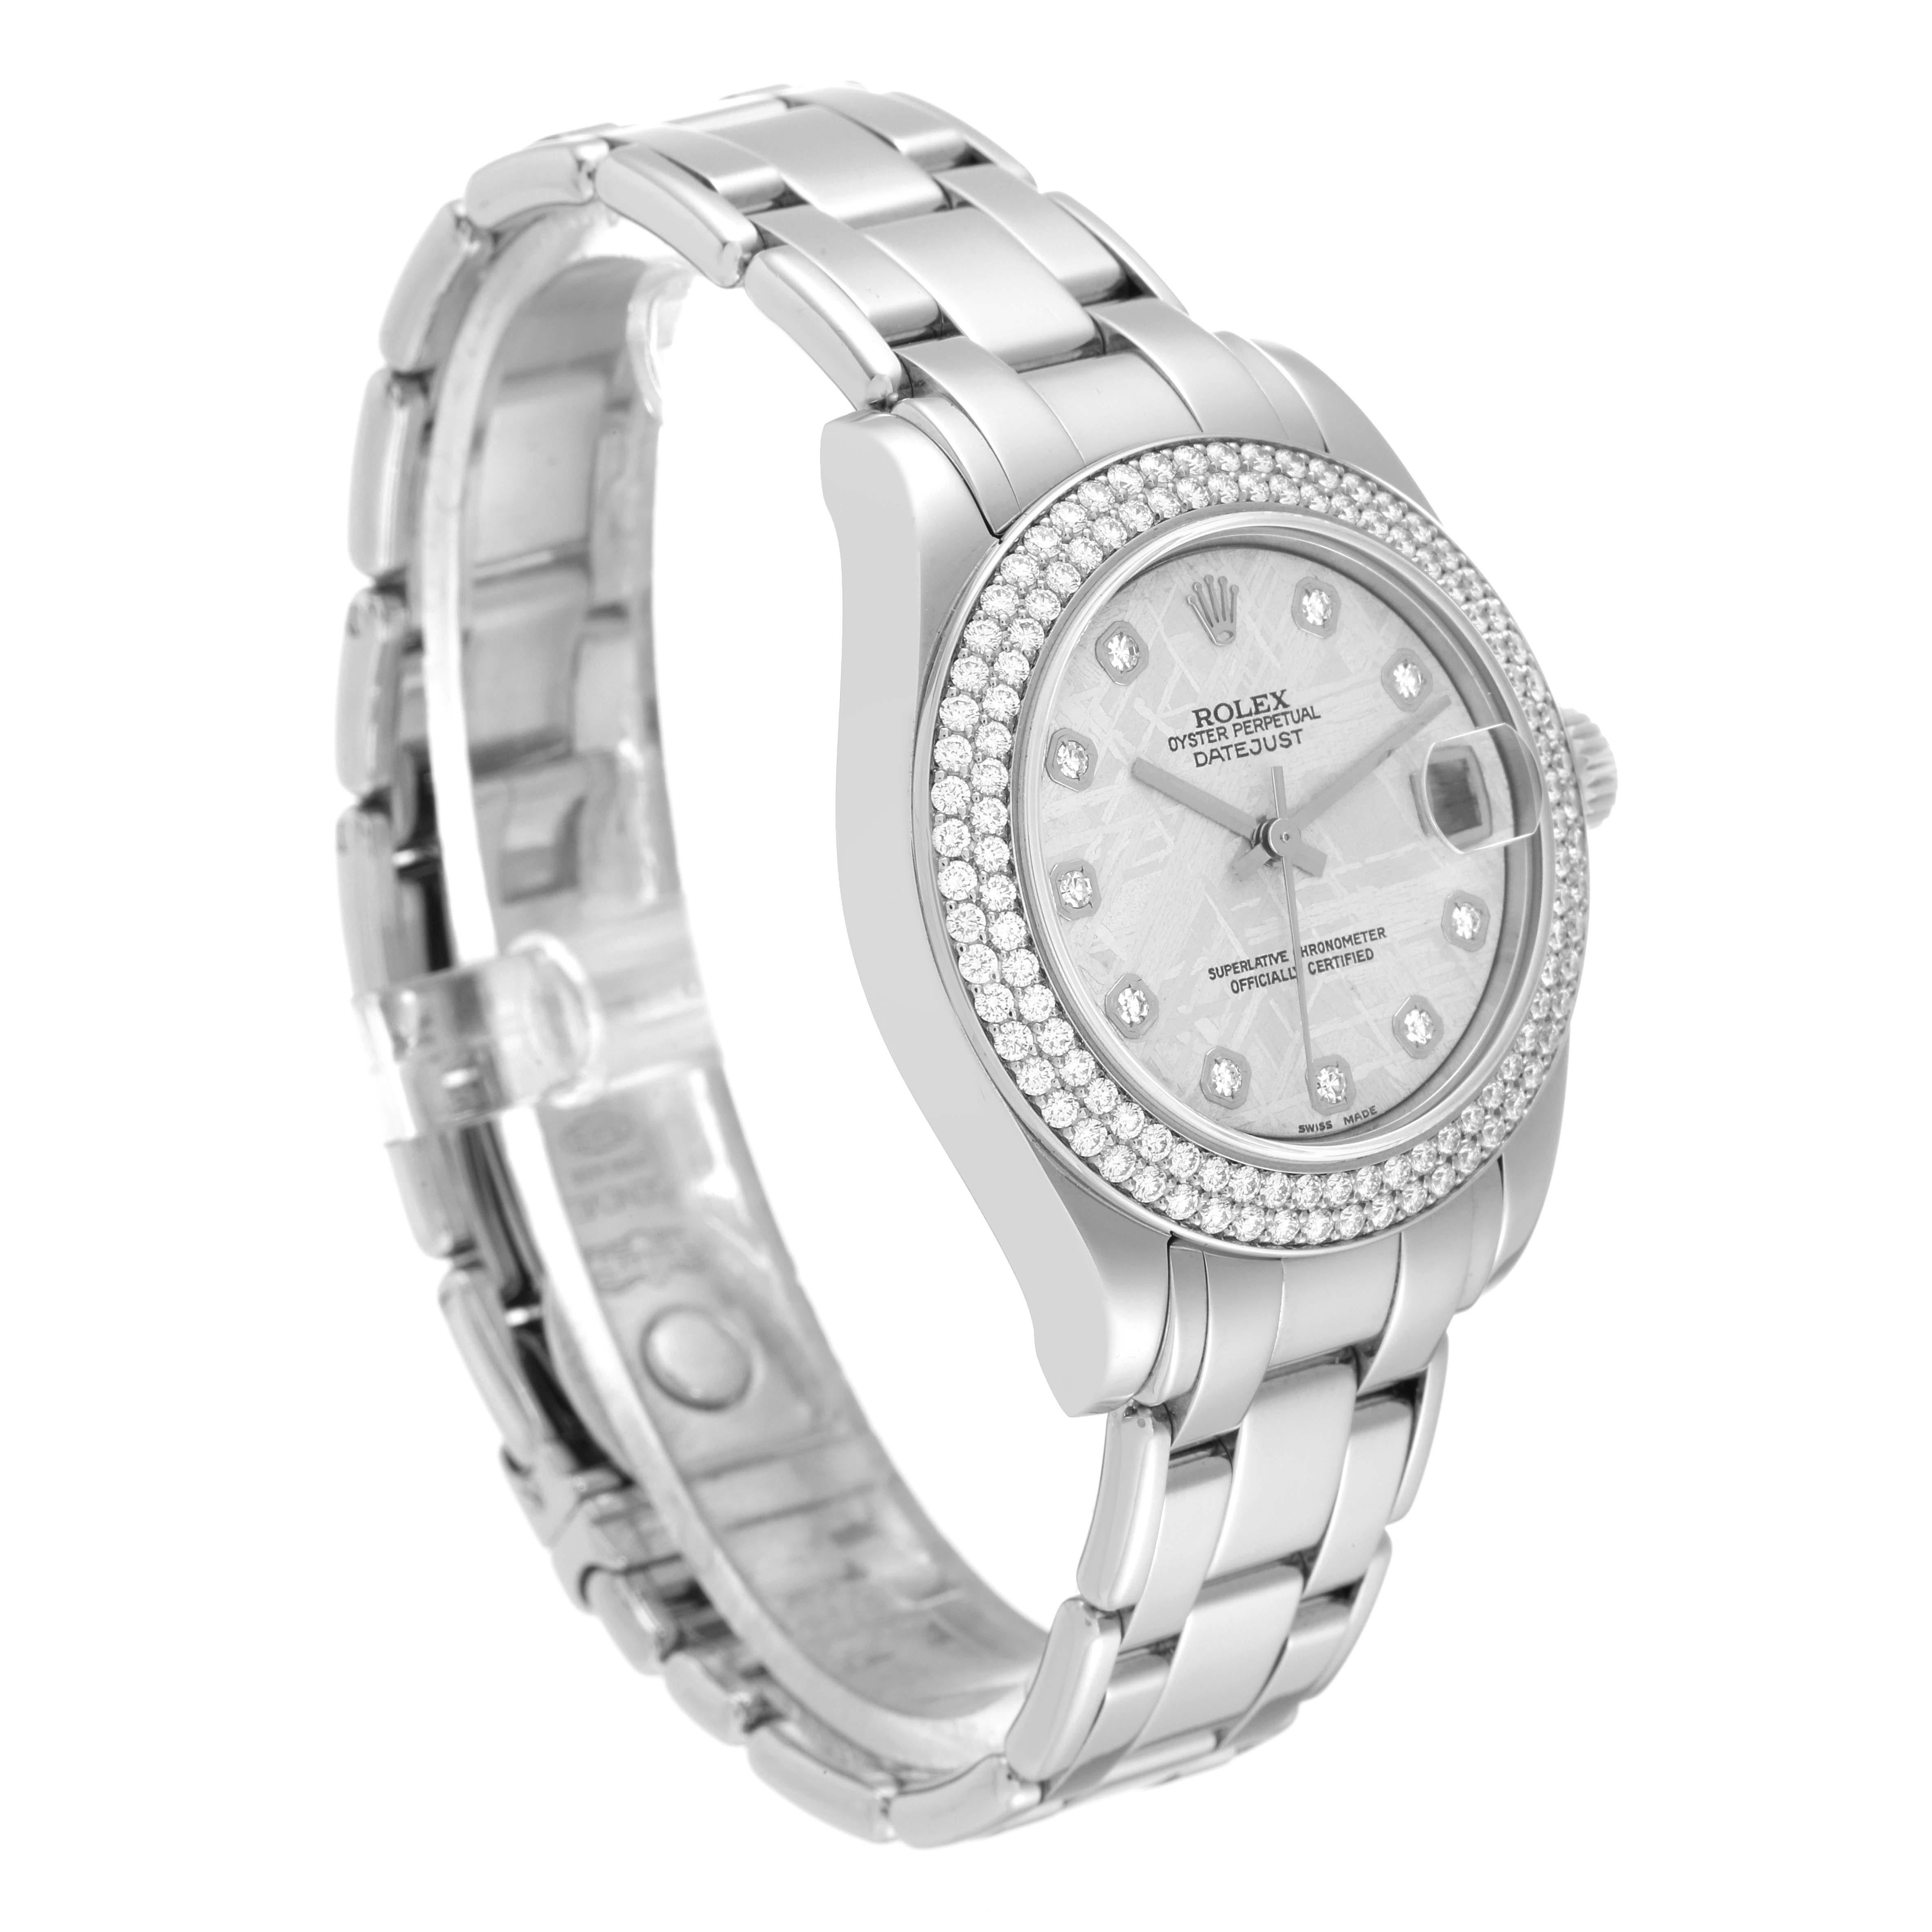 Rolex Pearlmaster 34 White Gold Meteorite Dial Diamond Ladies Watch 81339 In Excellent Condition For Sale In Atlanta, GA